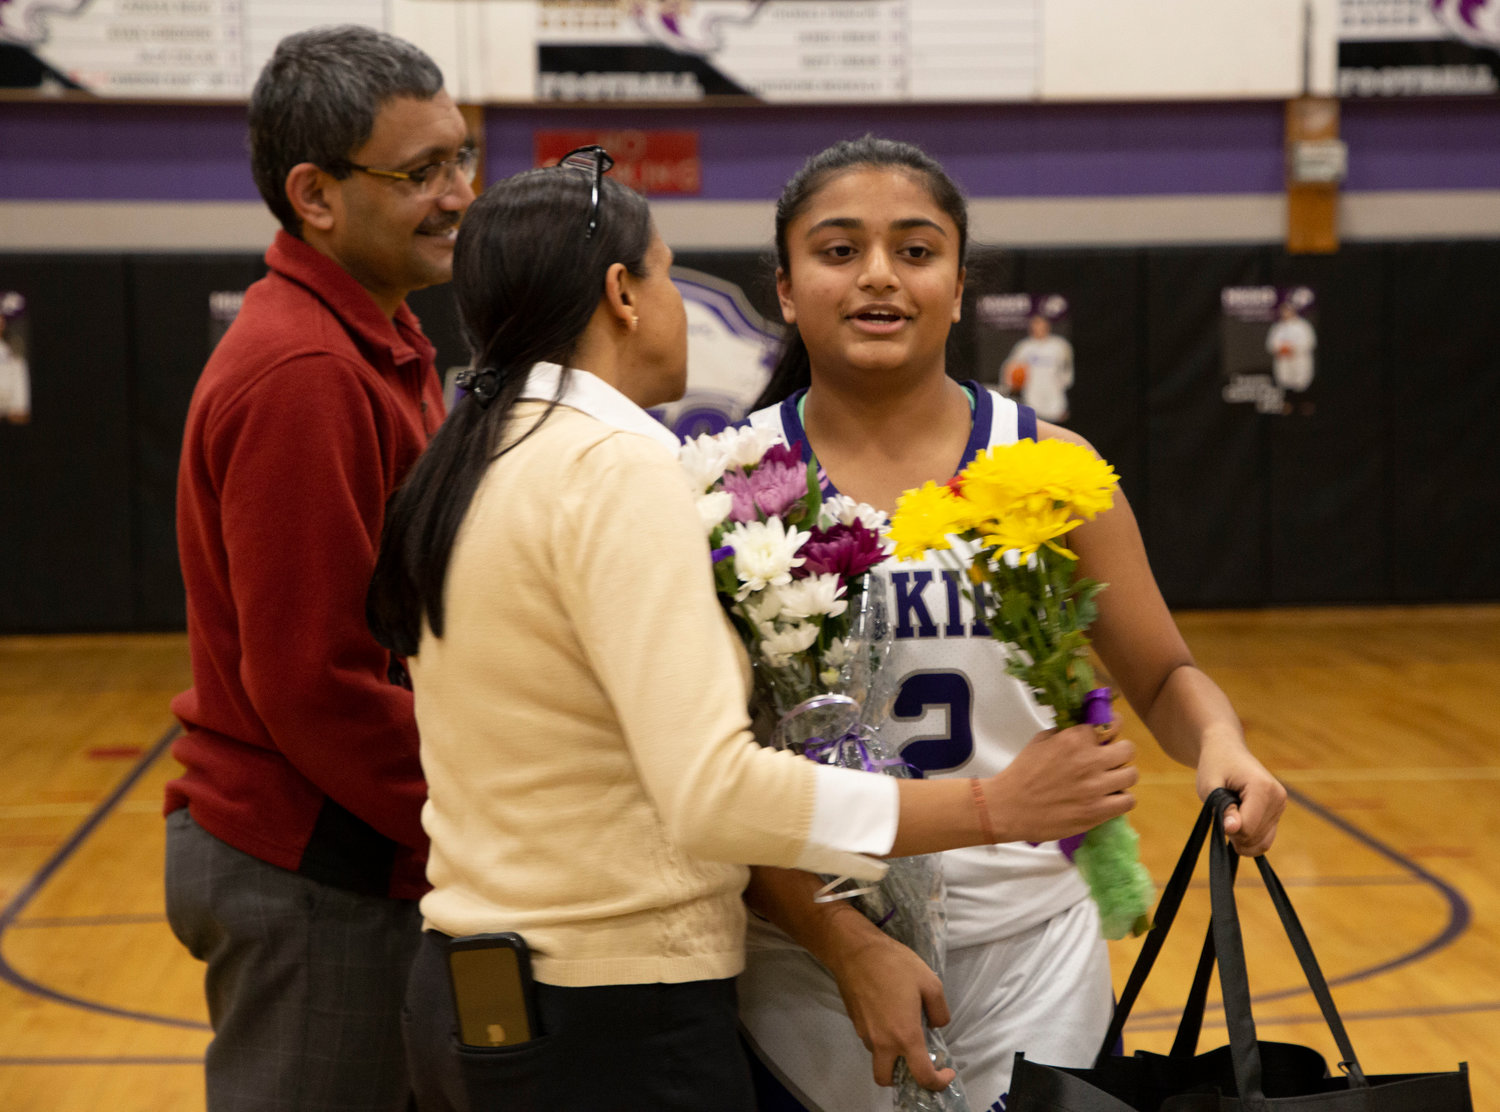 Shivani Mehta receives hugs and flowers from her parents.